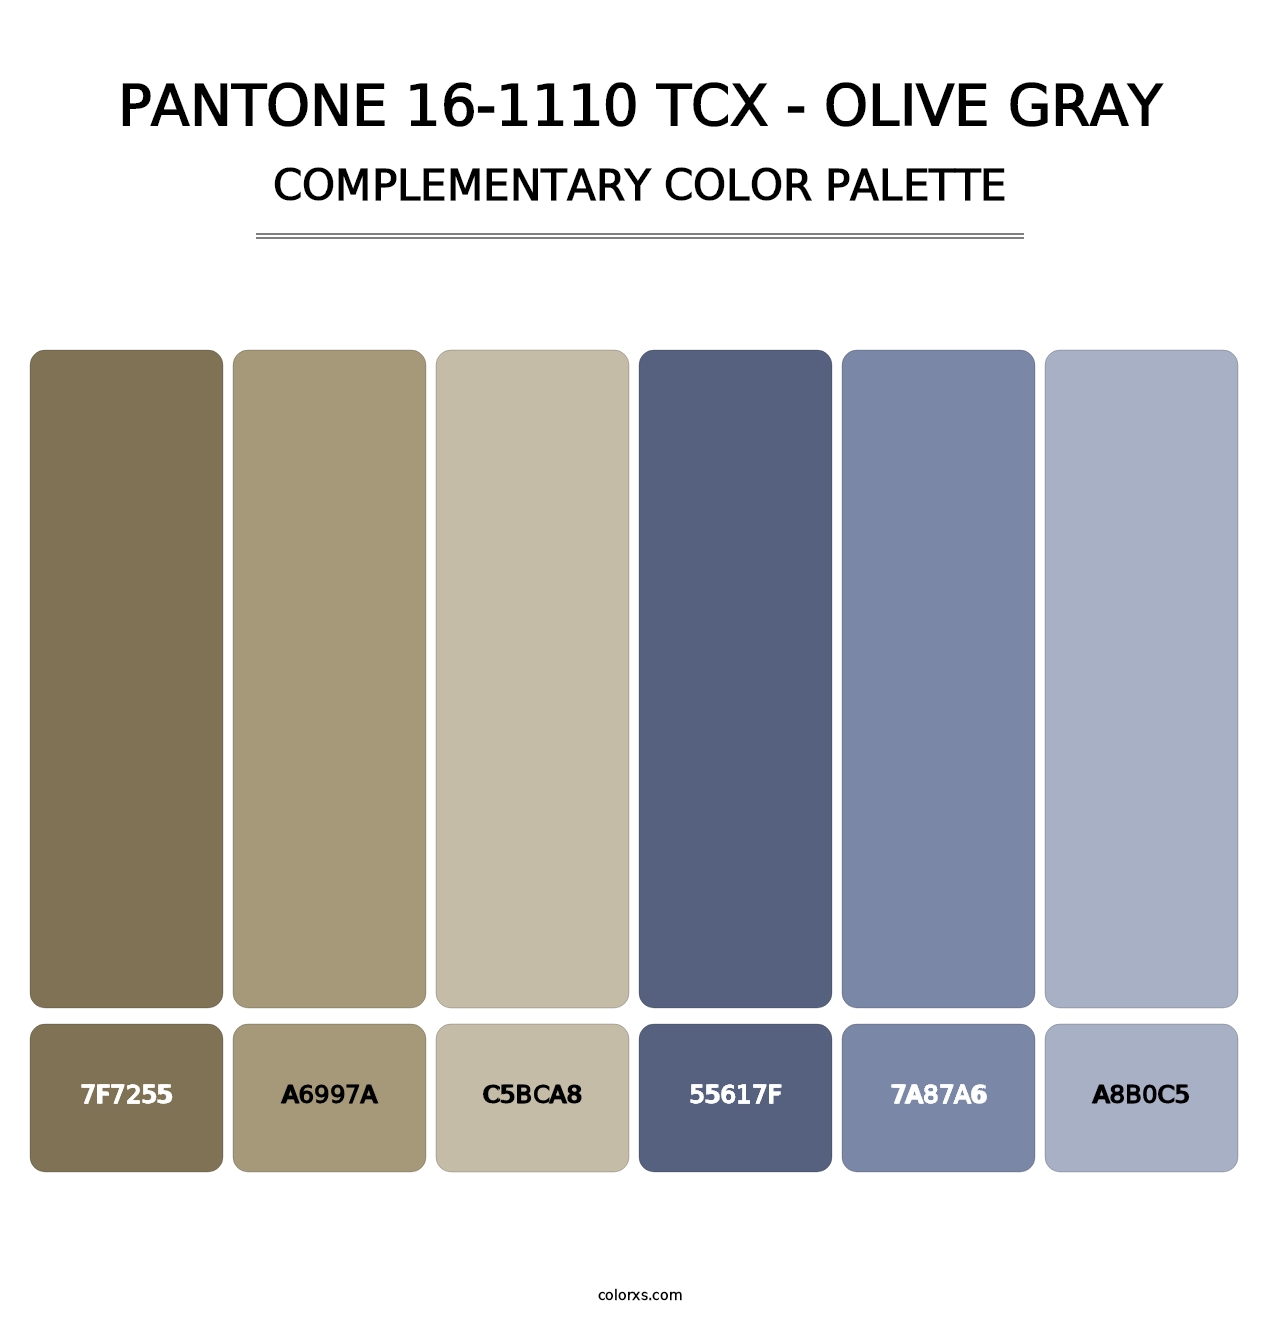 PANTONE 16-1110 TCX - Olive Gray - Complementary Color Palette